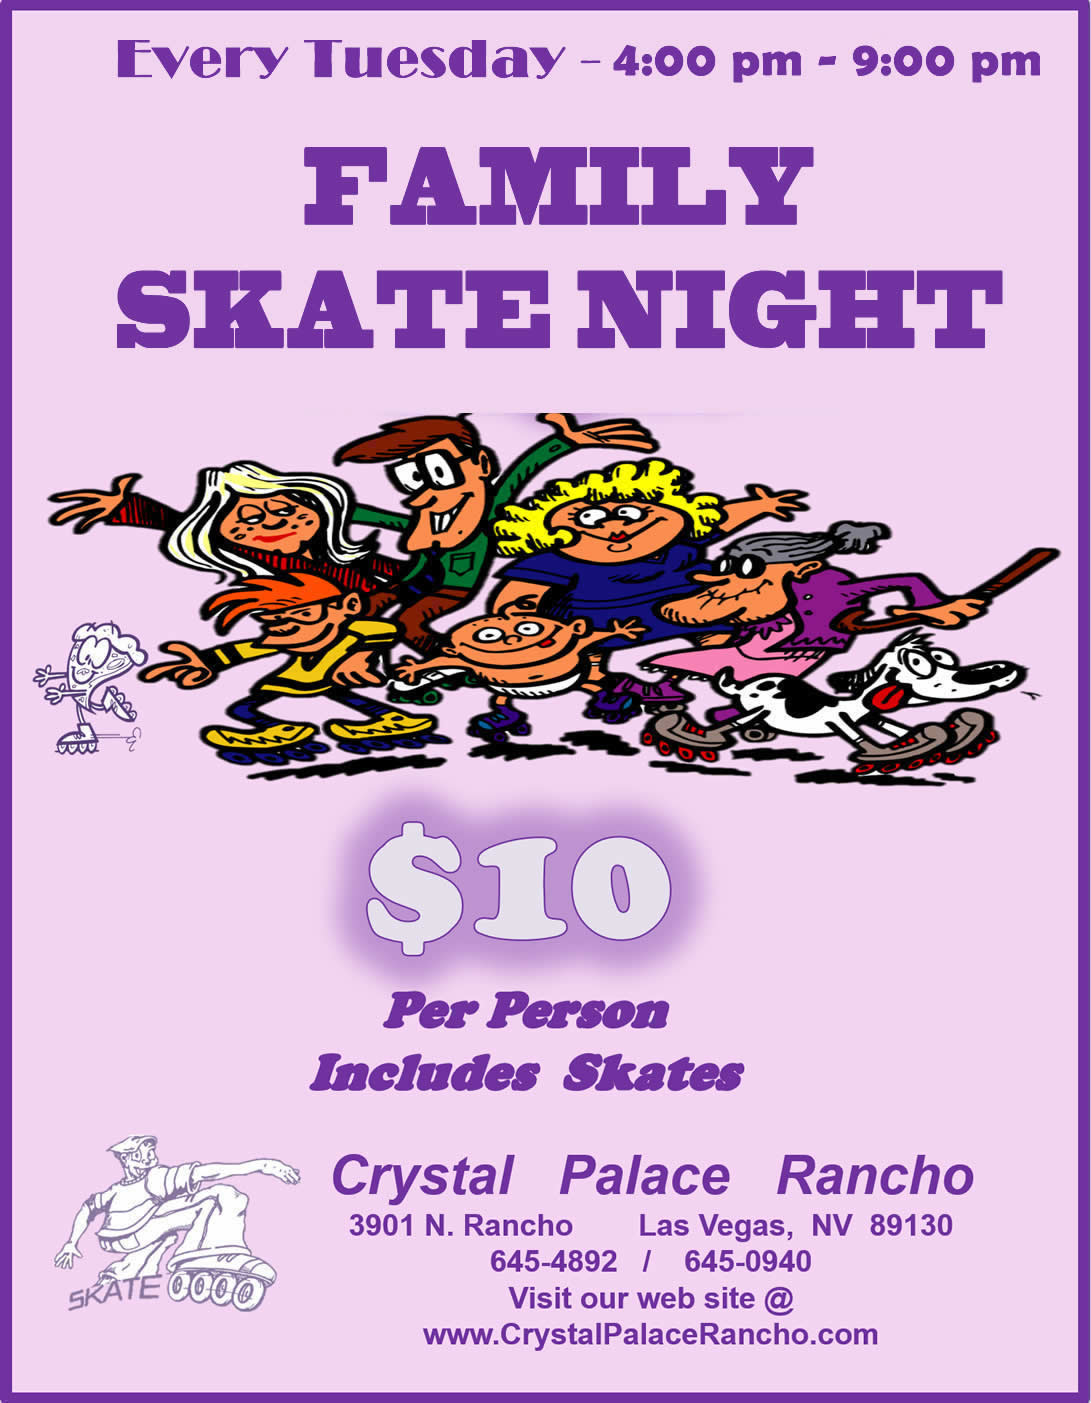 Family All Day Roller Skating Party, Every Tuesday from 11am - 9pm.